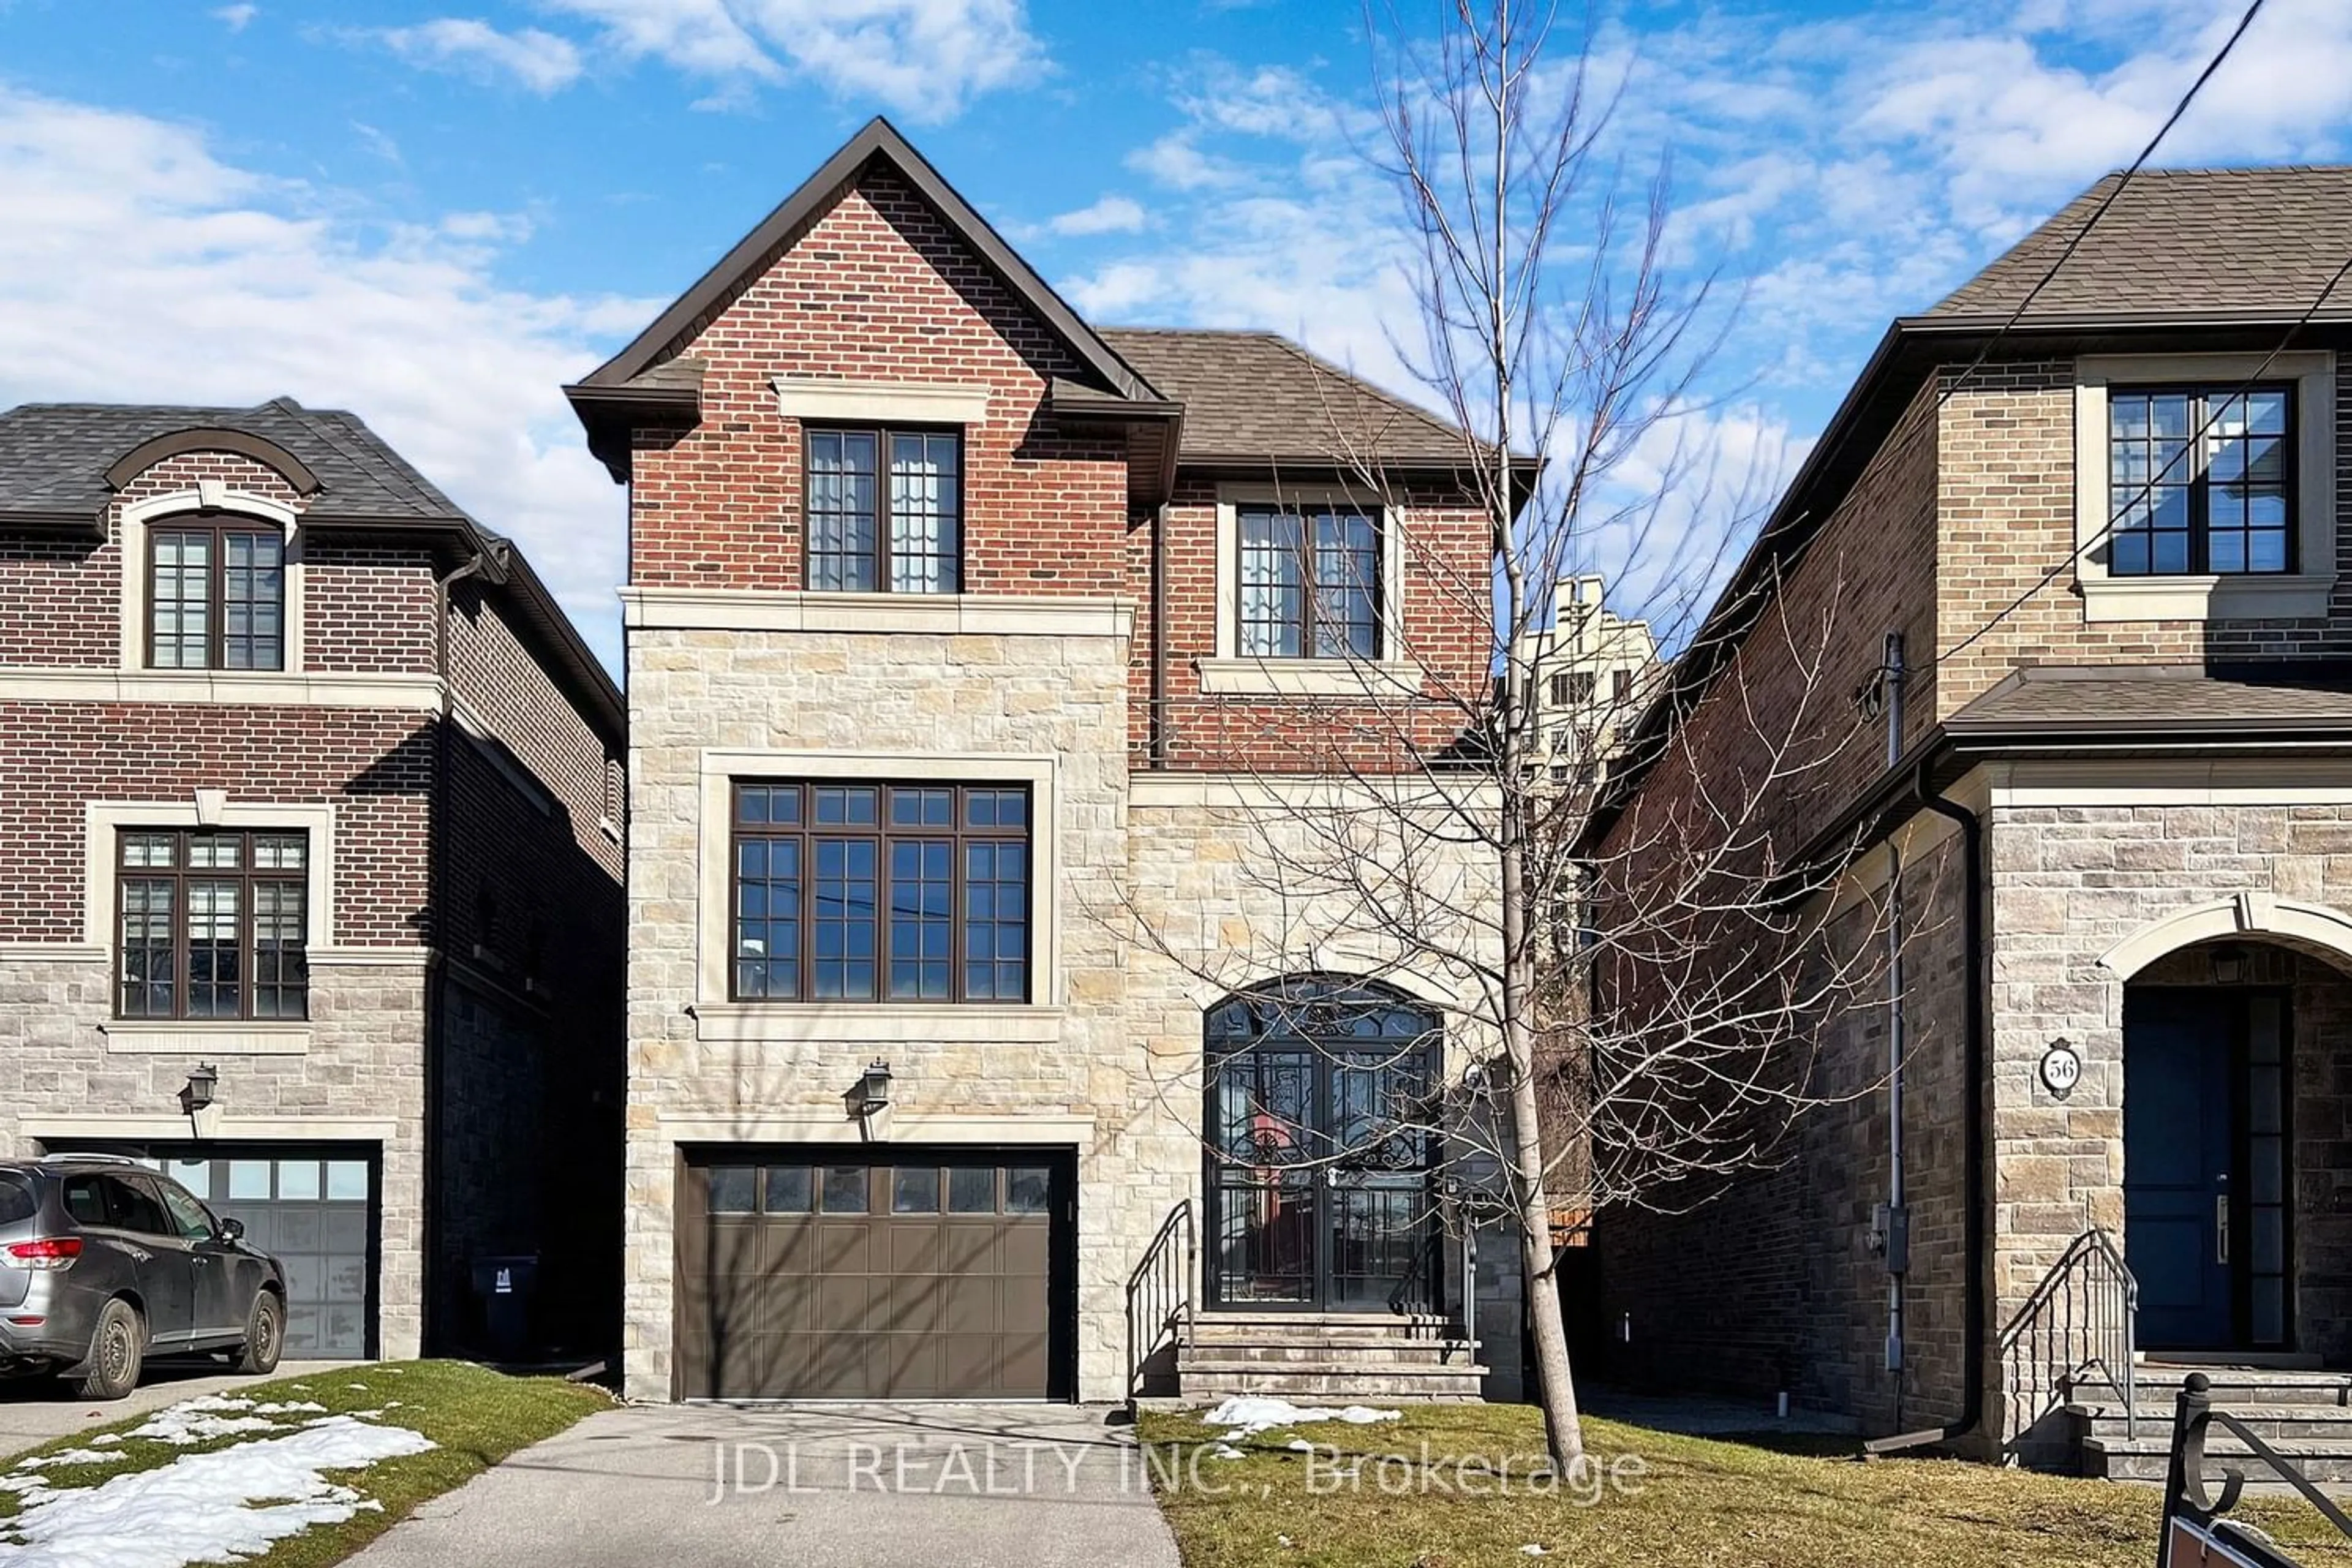 Home with brick exterior material for 54 Granlea Rd, Toronto Ontario M2N 2Z5